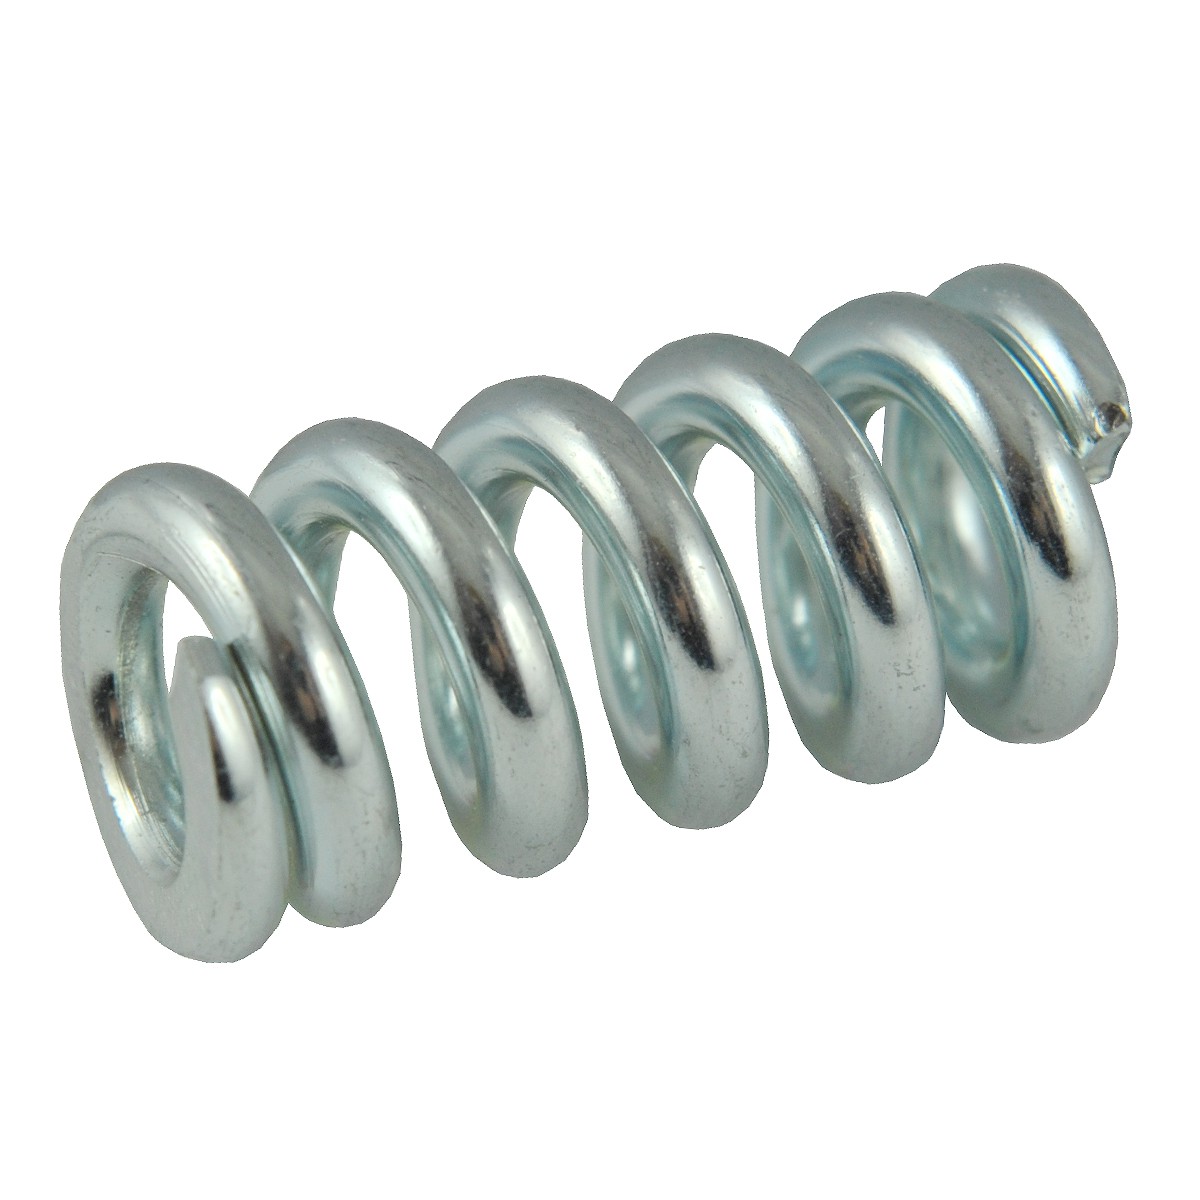 Mirror spring 45 x 22 x 5 mm / LS MT1.25 / LS MT3.35 / LS MT3.40 / LS MT3.50 / LS MT3.60 / TRG869 / 40278673